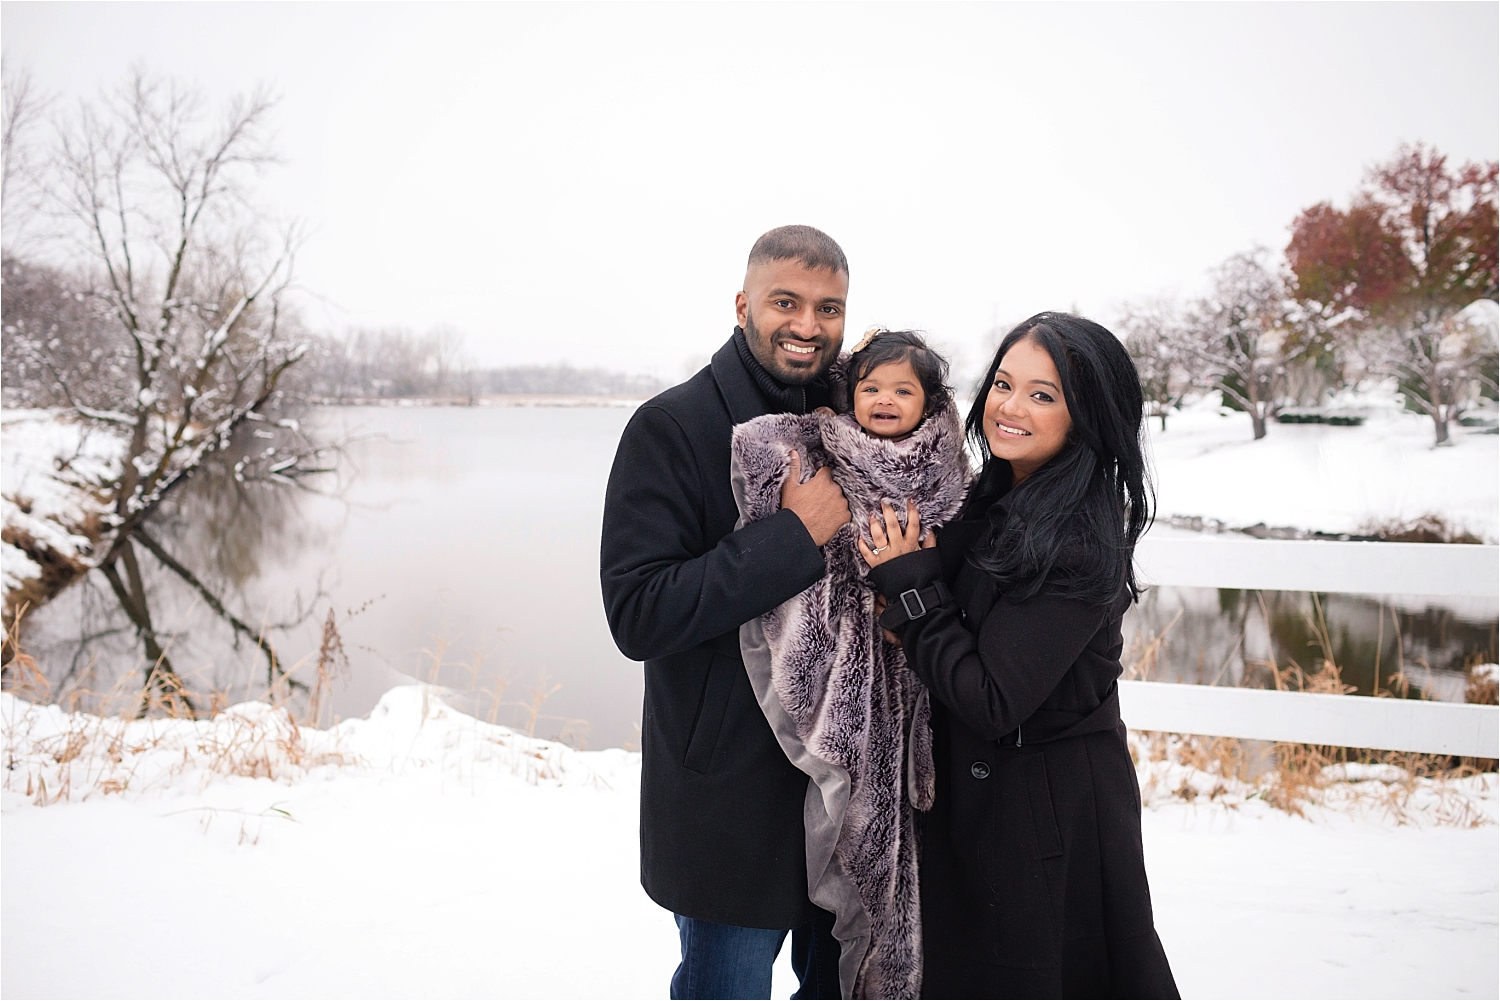 Winter family photography